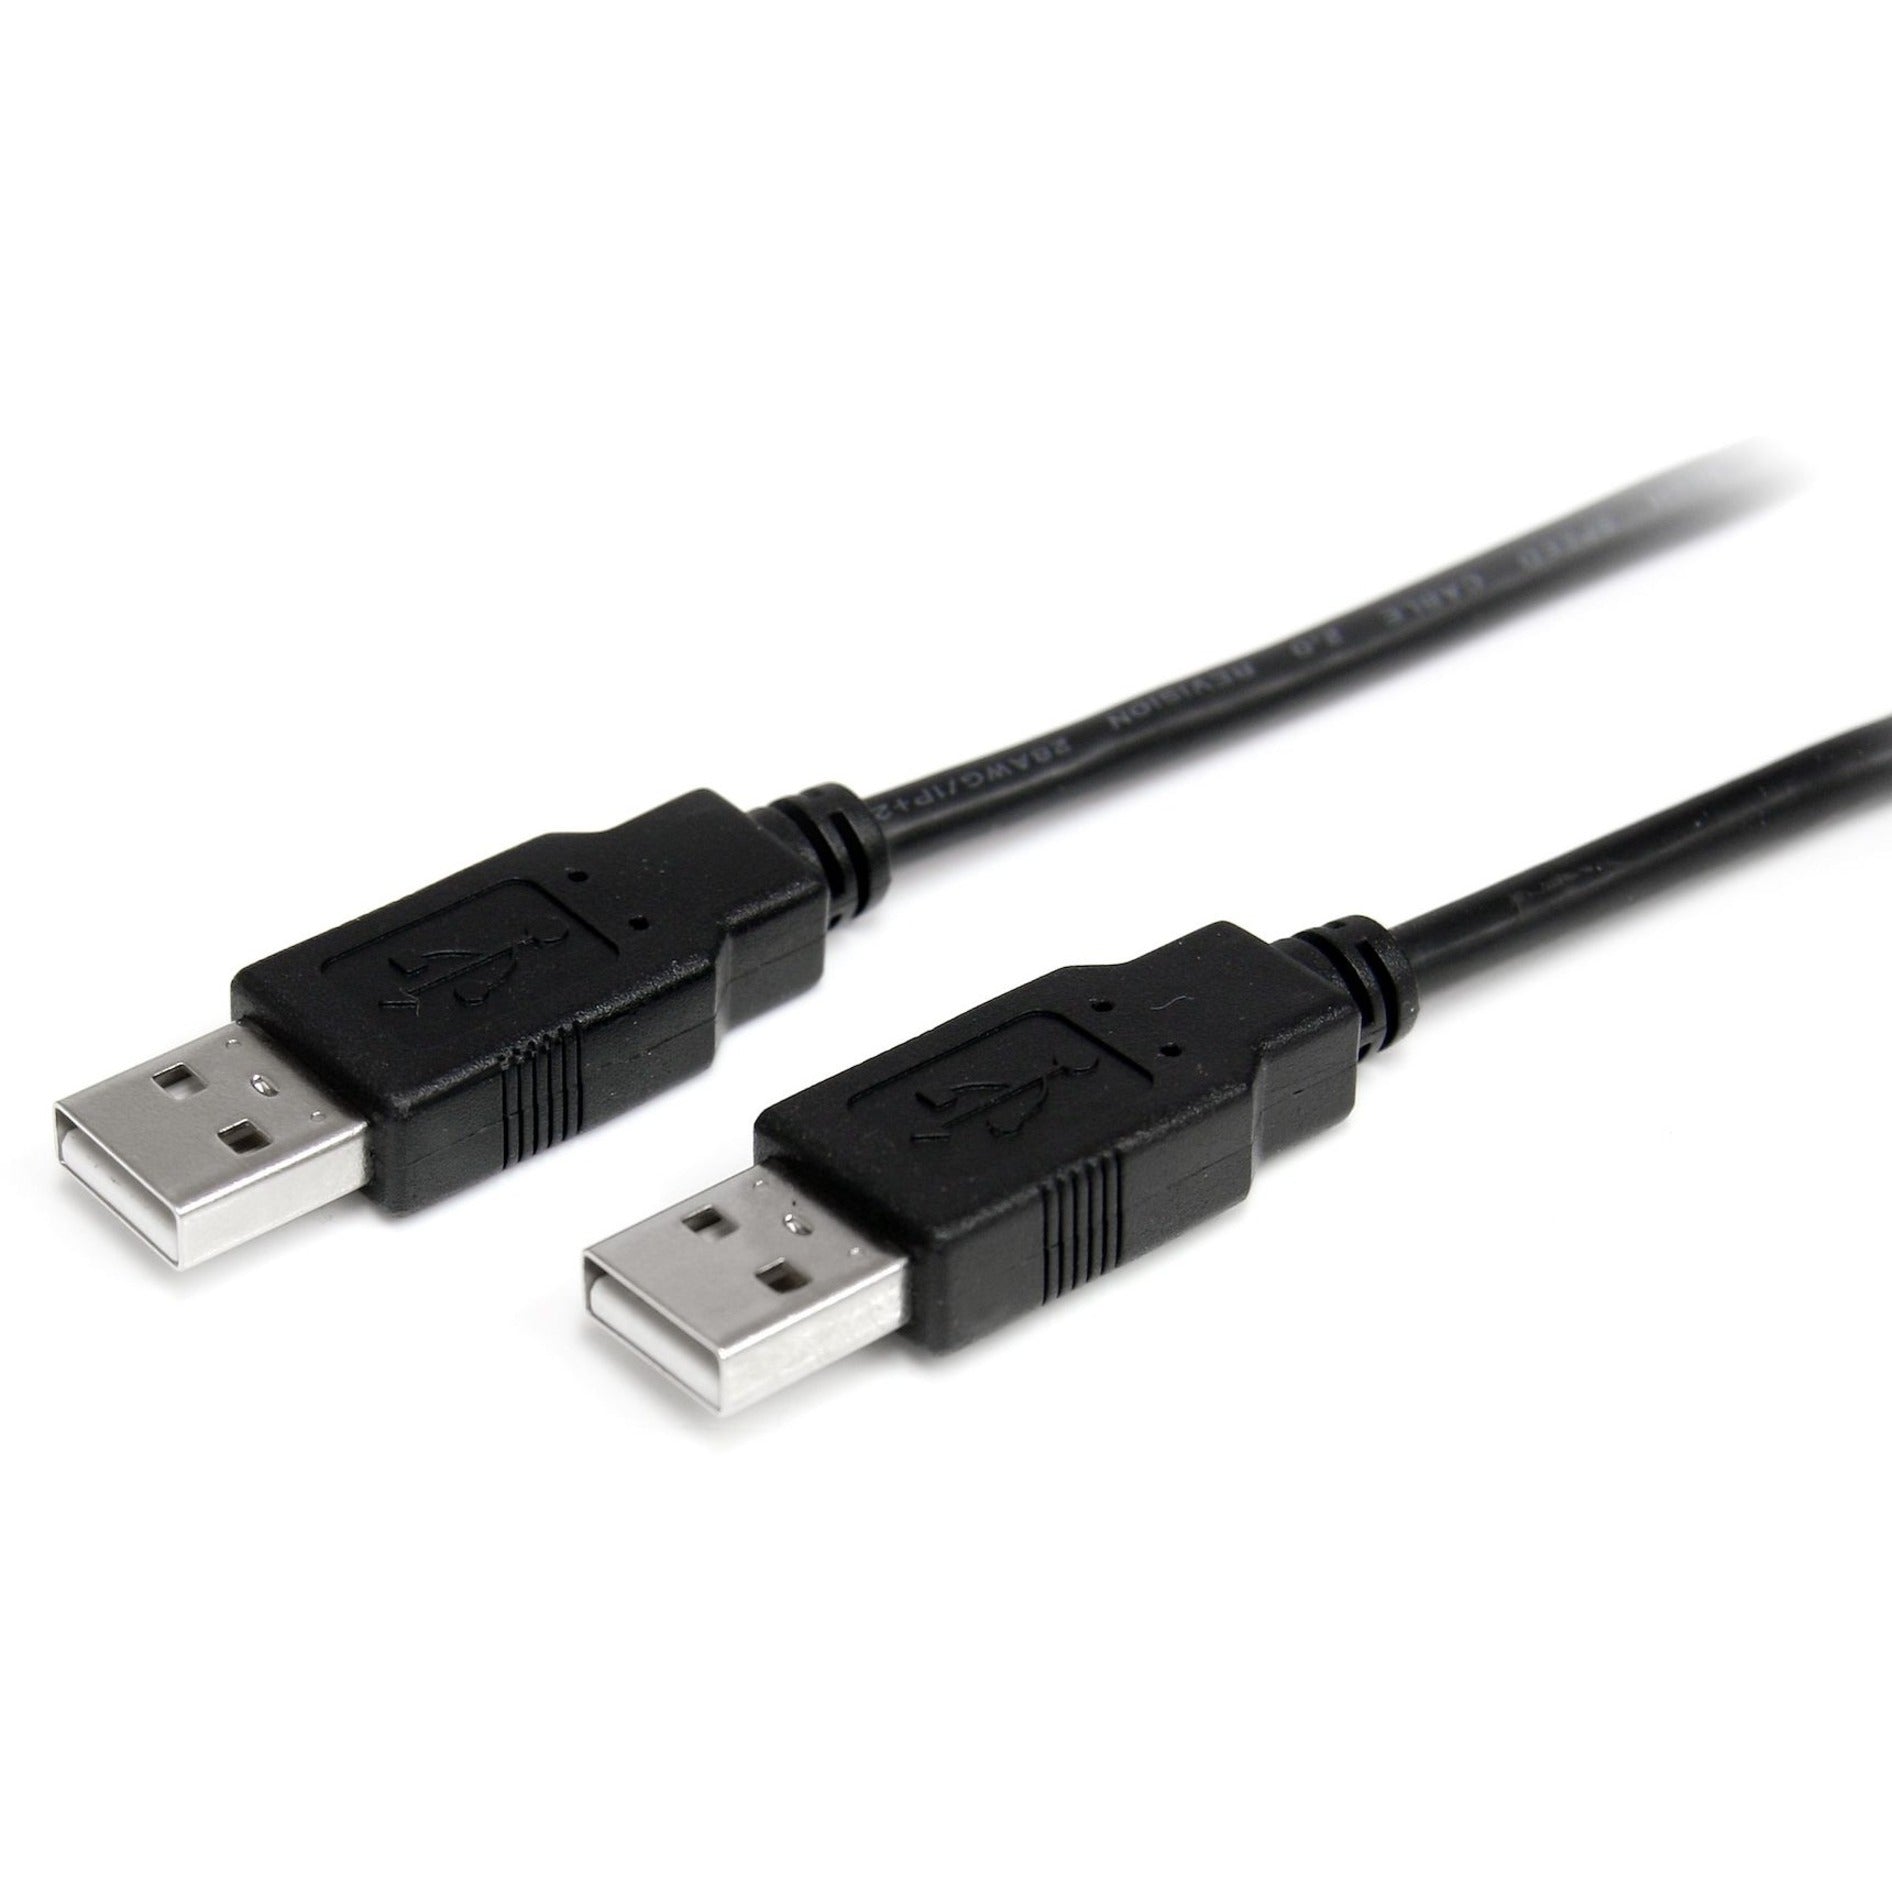 StarTech.com USB C to USB Cable - 3 ft / 1m - USB A to C - USB 2.0 Cable -  USB Adapter Cable - USB Type C - USB-C Cable (USB2AC1M)